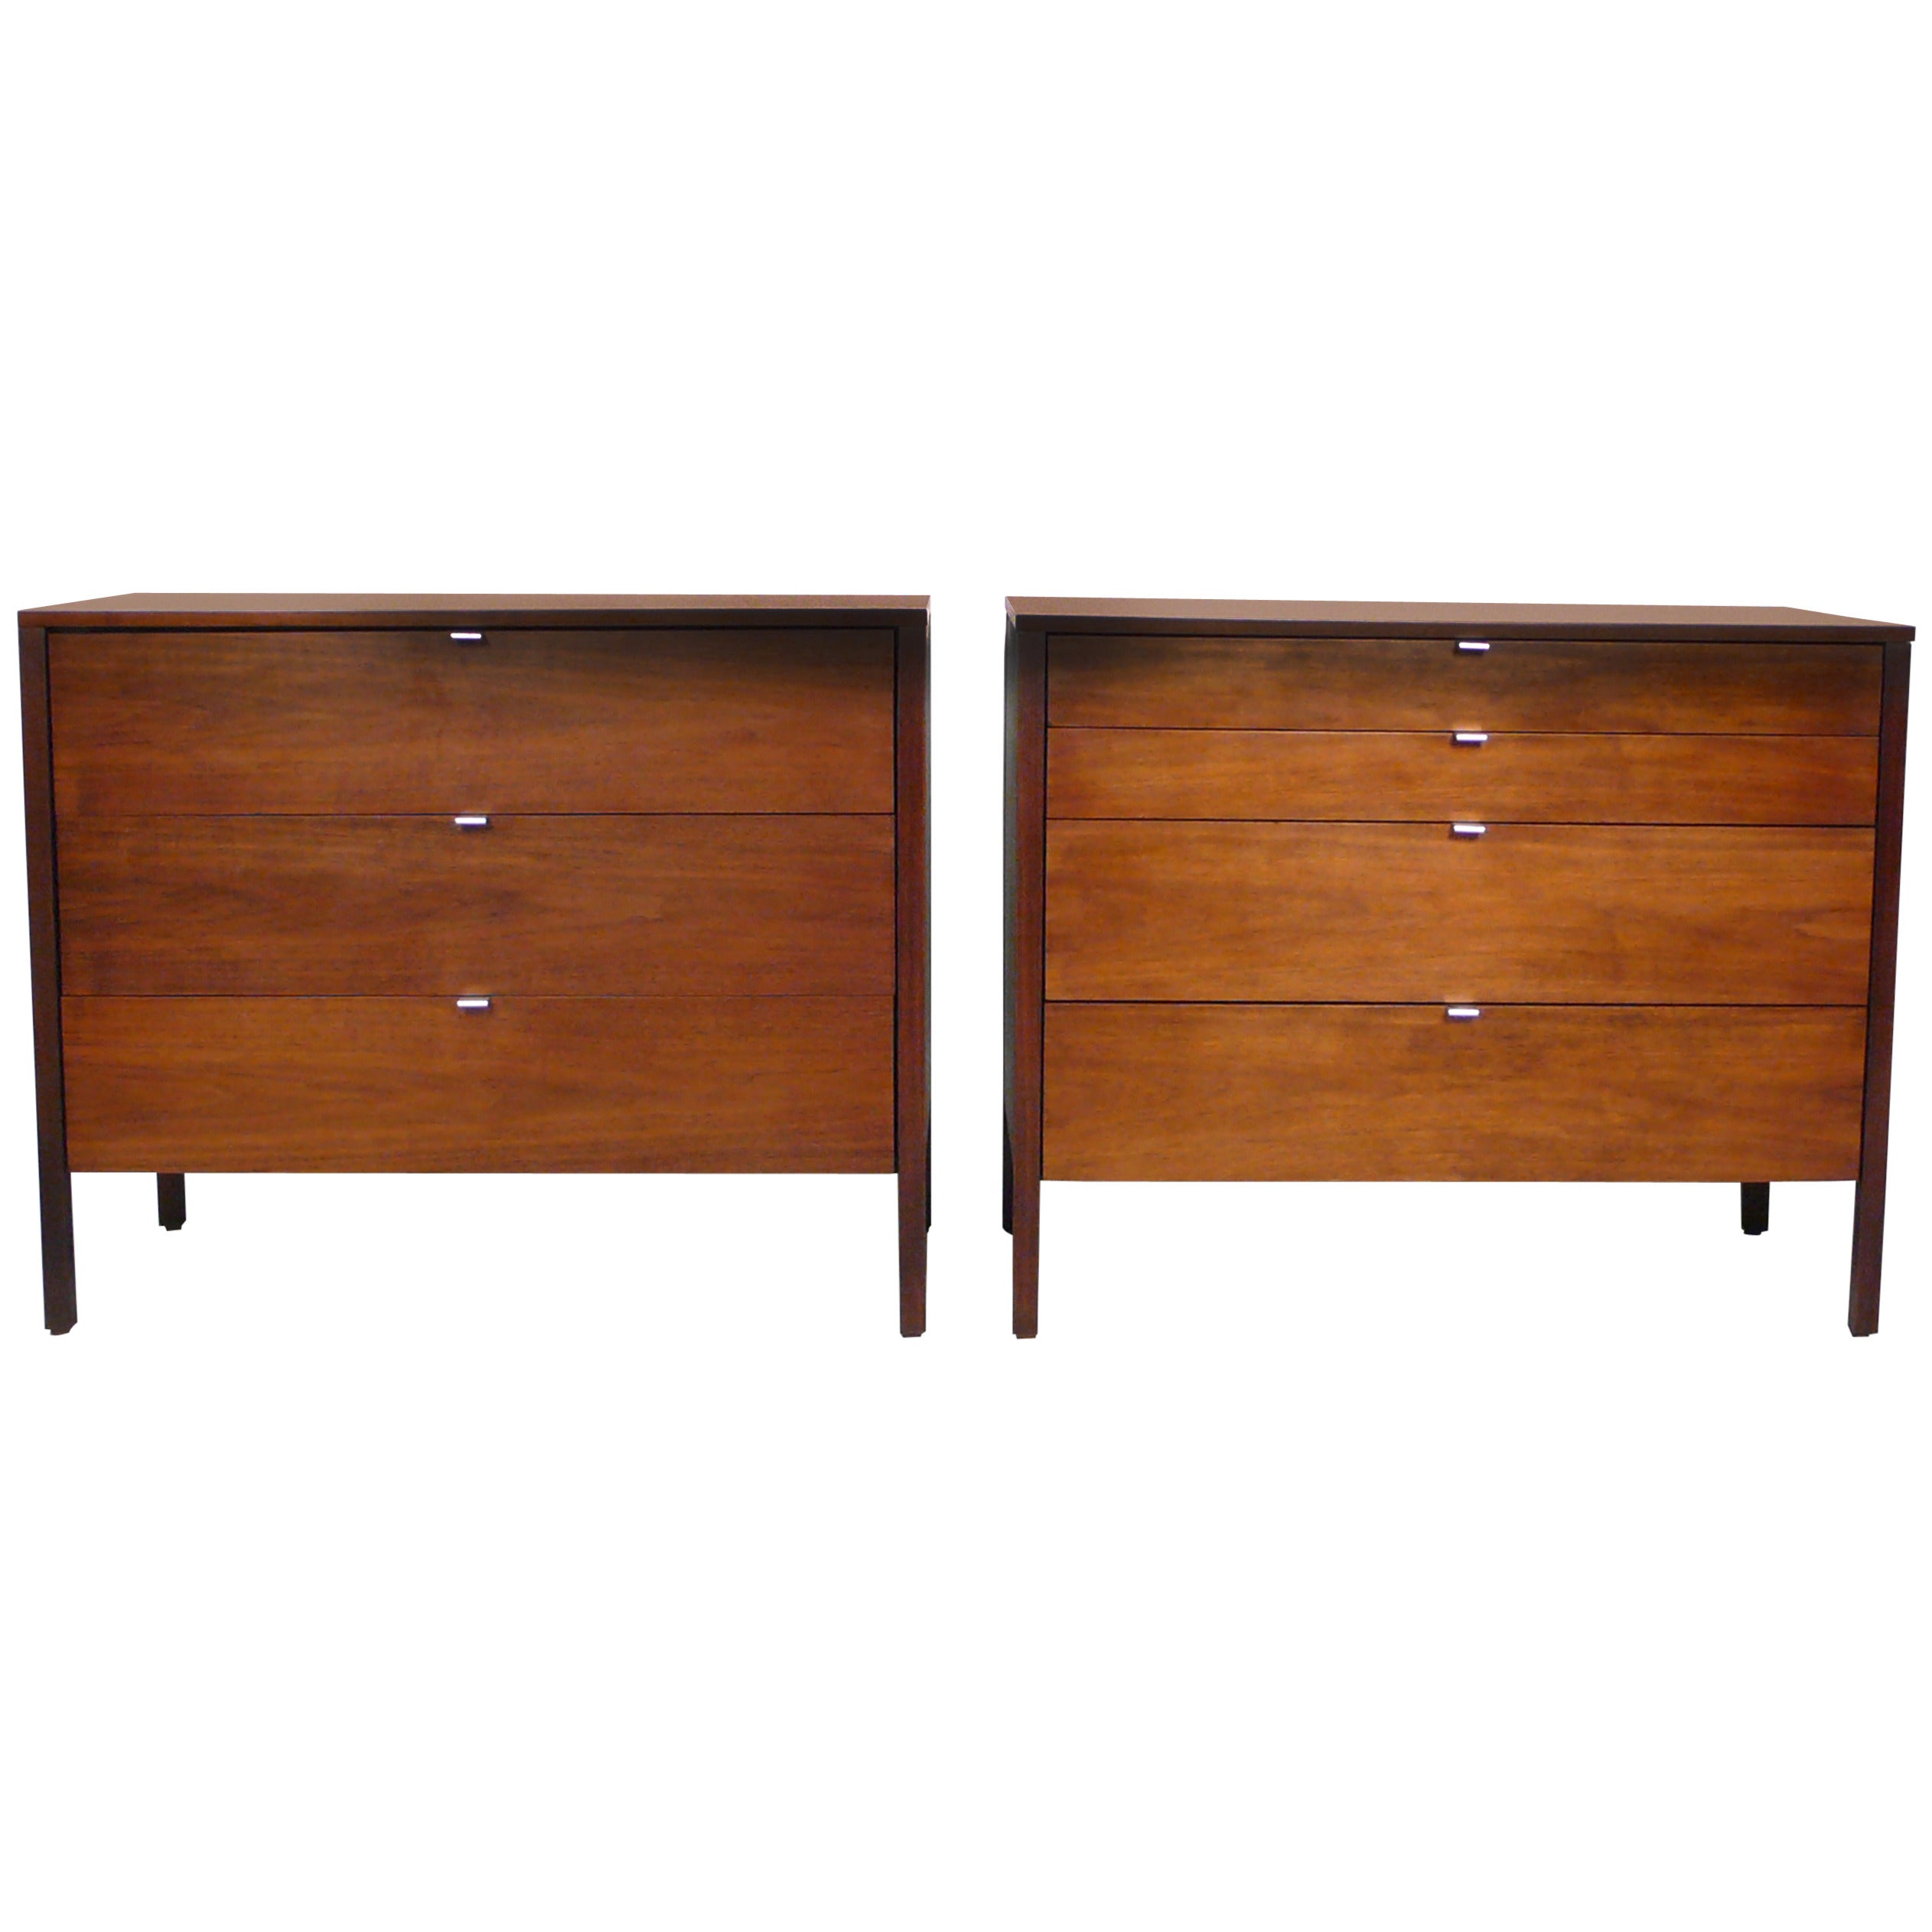 Four-Drawer Dressers by Florence Knoll